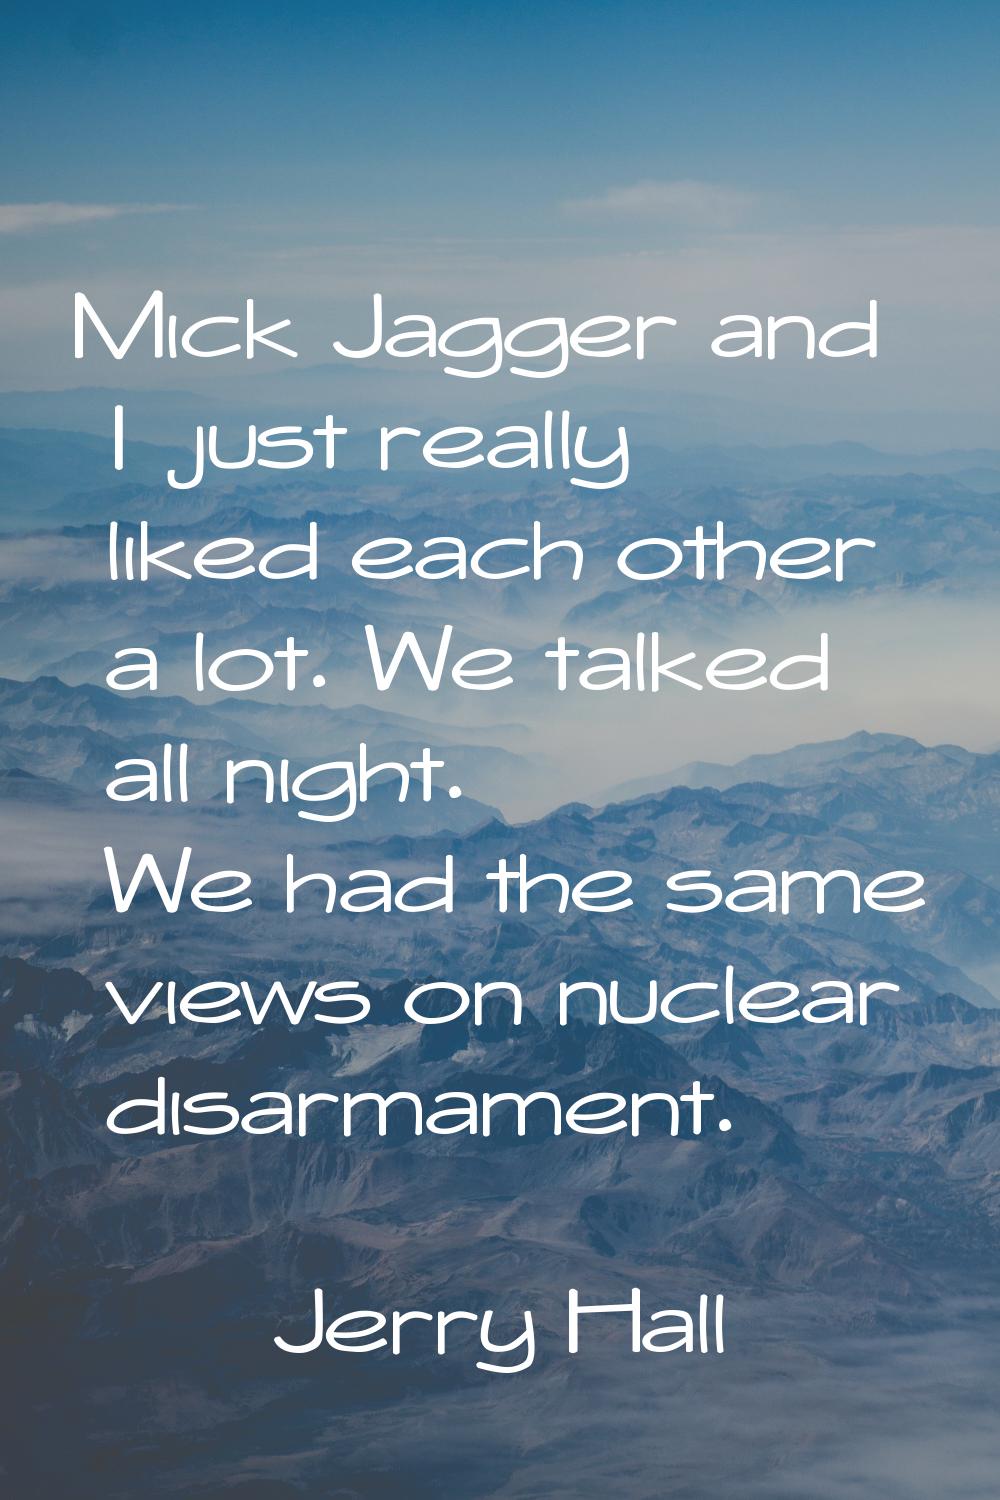 Mick Jagger and I just really liked each other a lot. We talked all night. We had the same views on